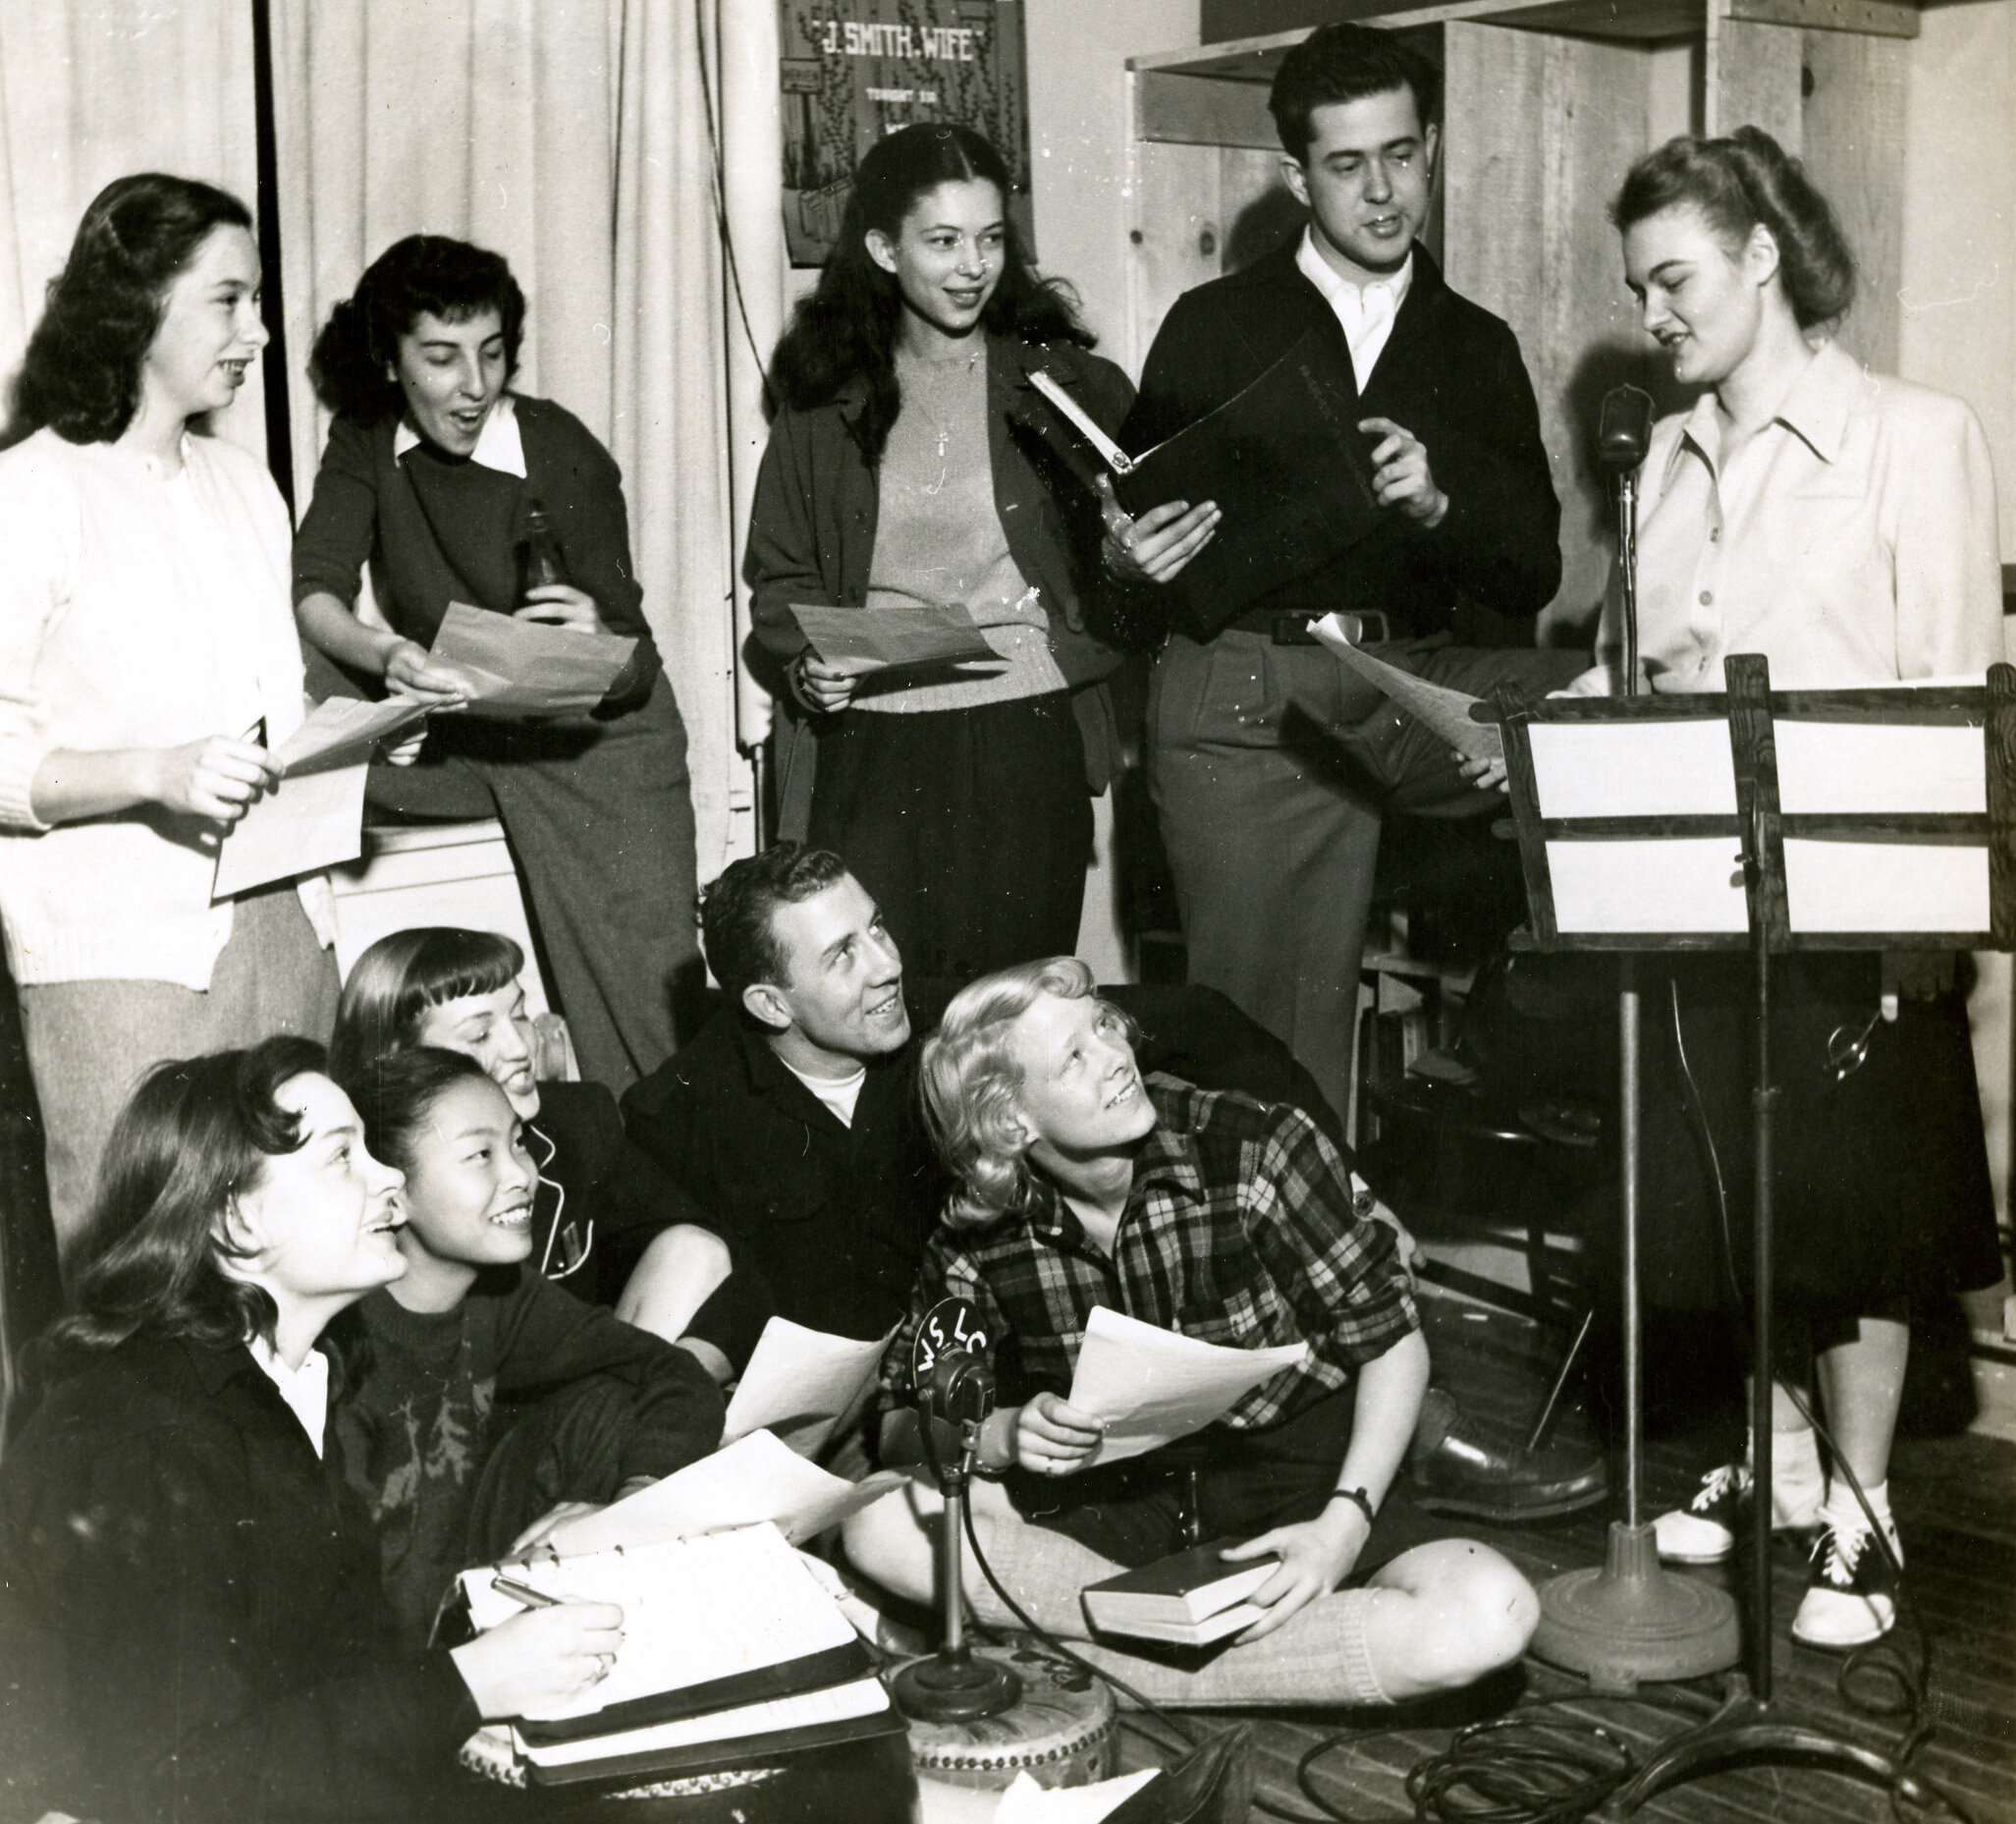  In its first few decades, WSLC aired more academic programs, like theater performances and educational lectures from professors.  Photo Courtesy of the Sarah Lawrence College Archives 